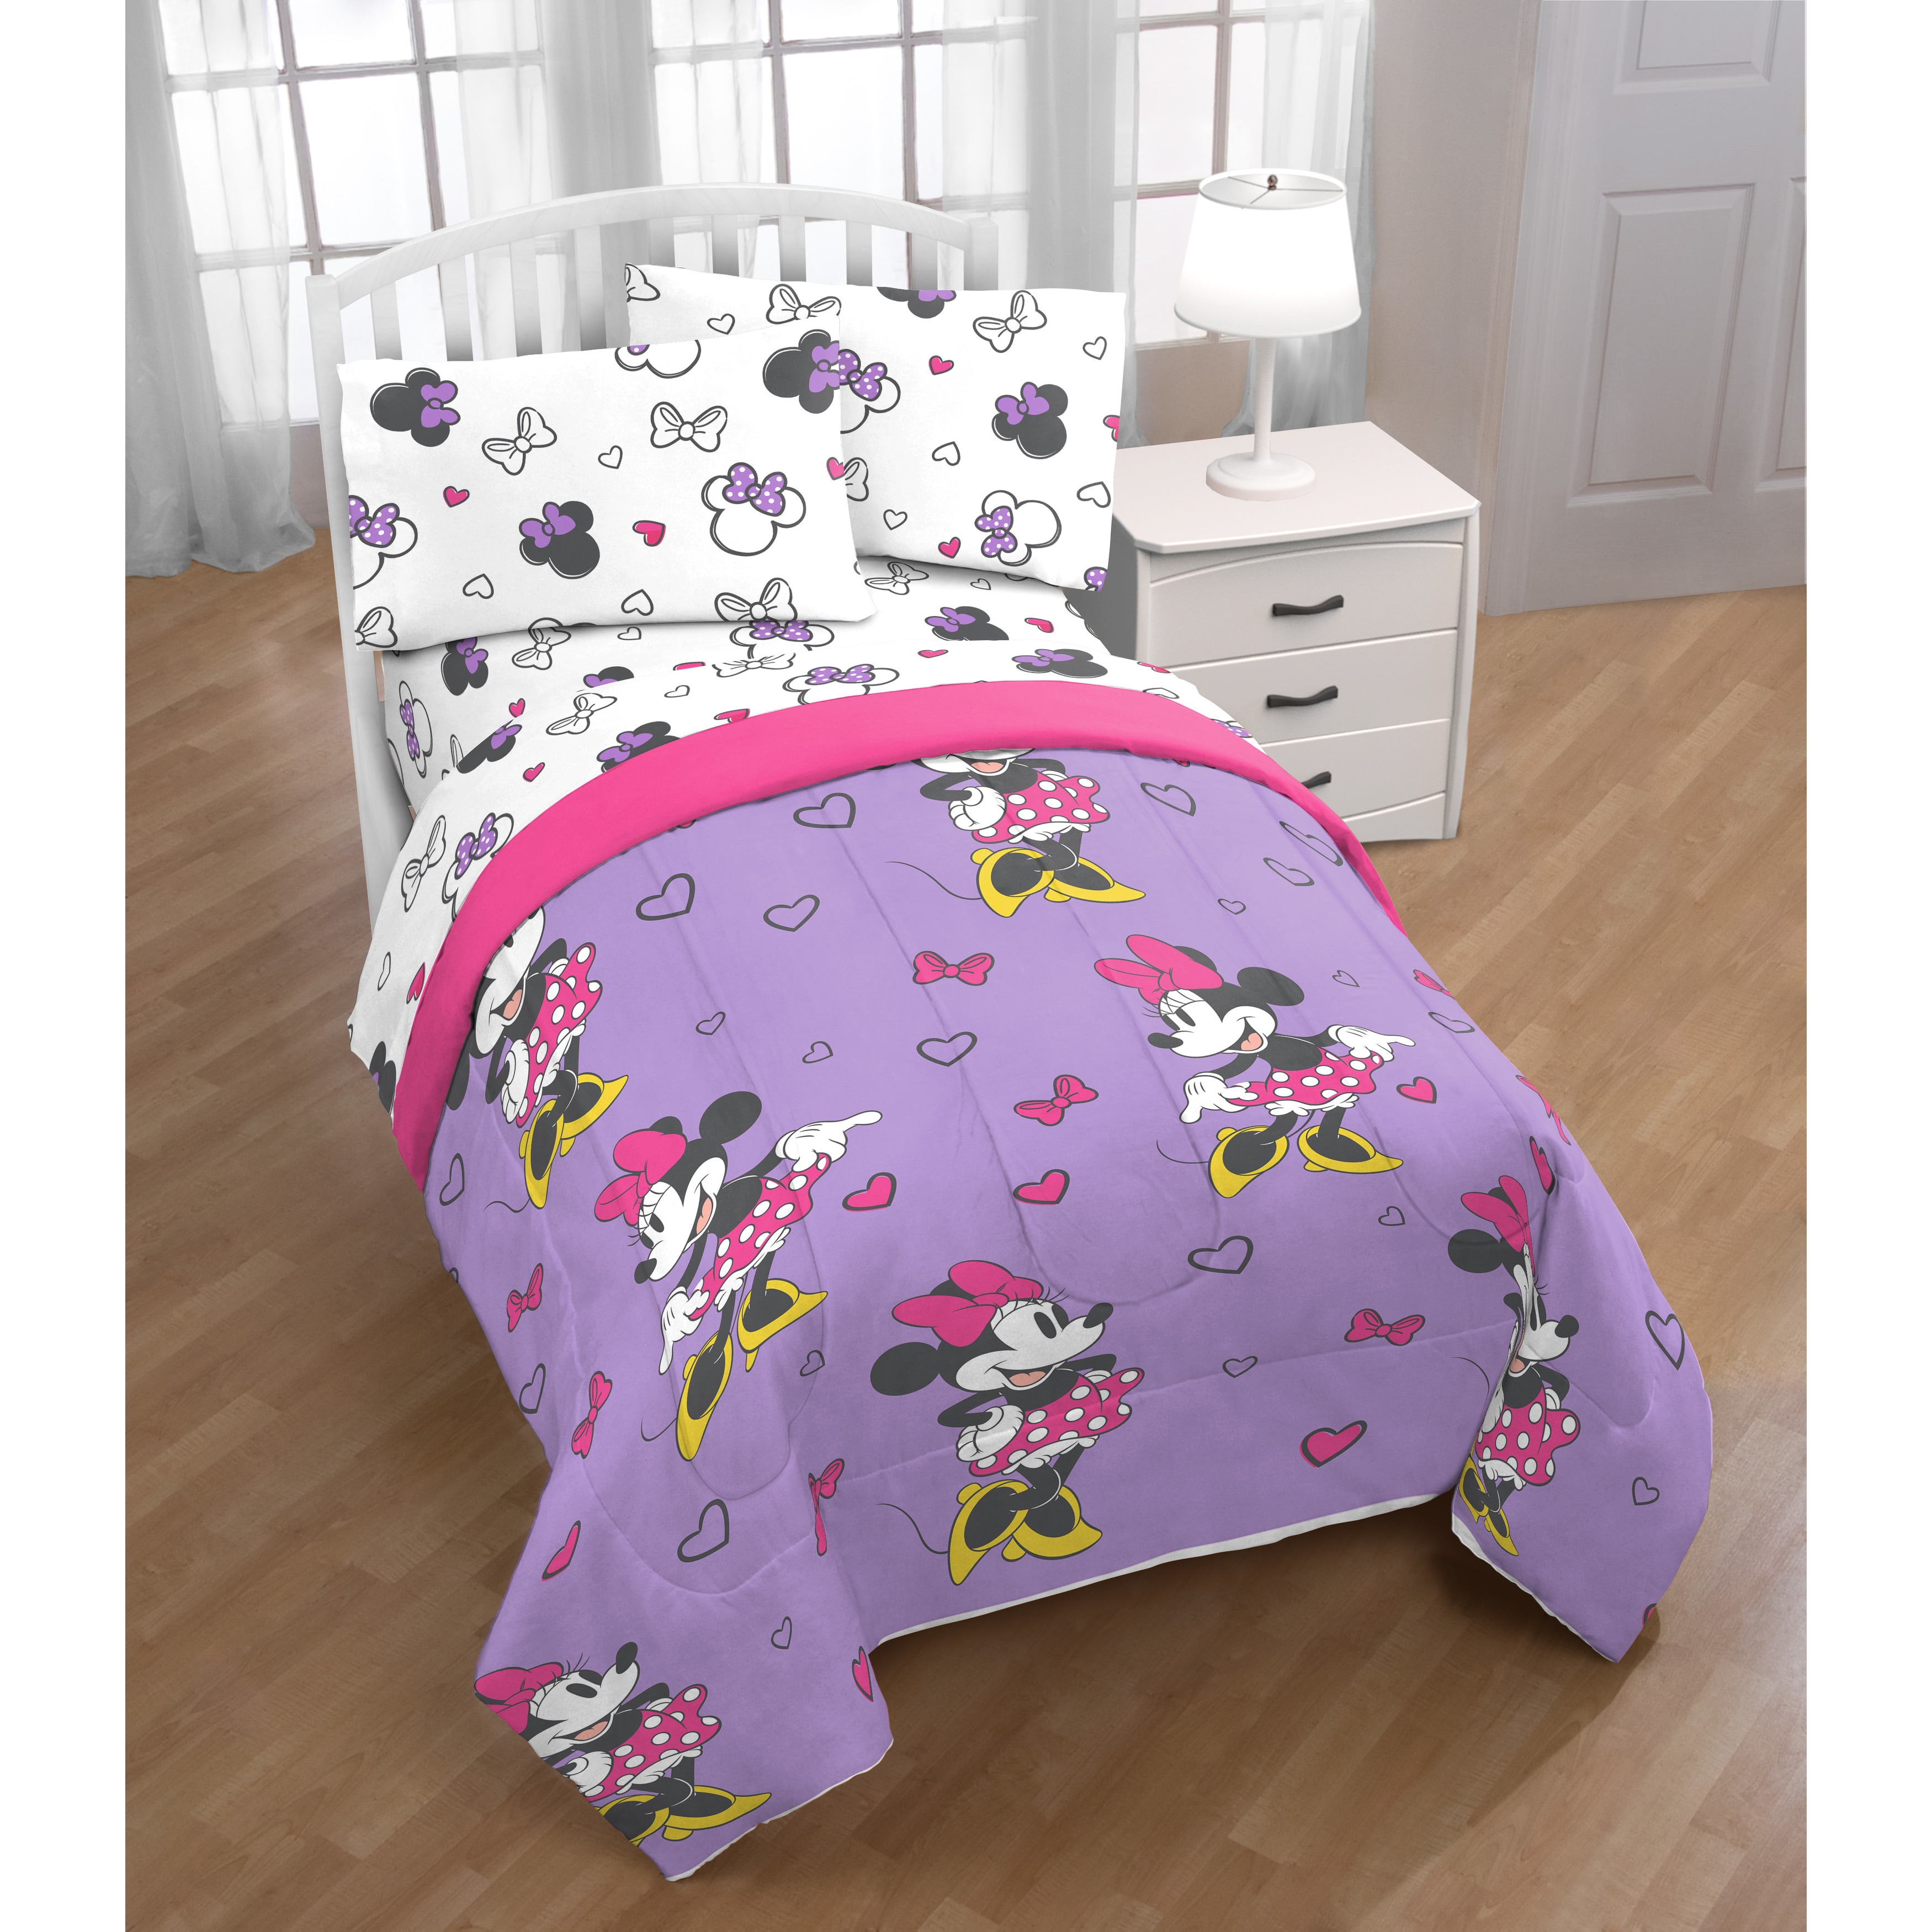 twin minnie mouse bed